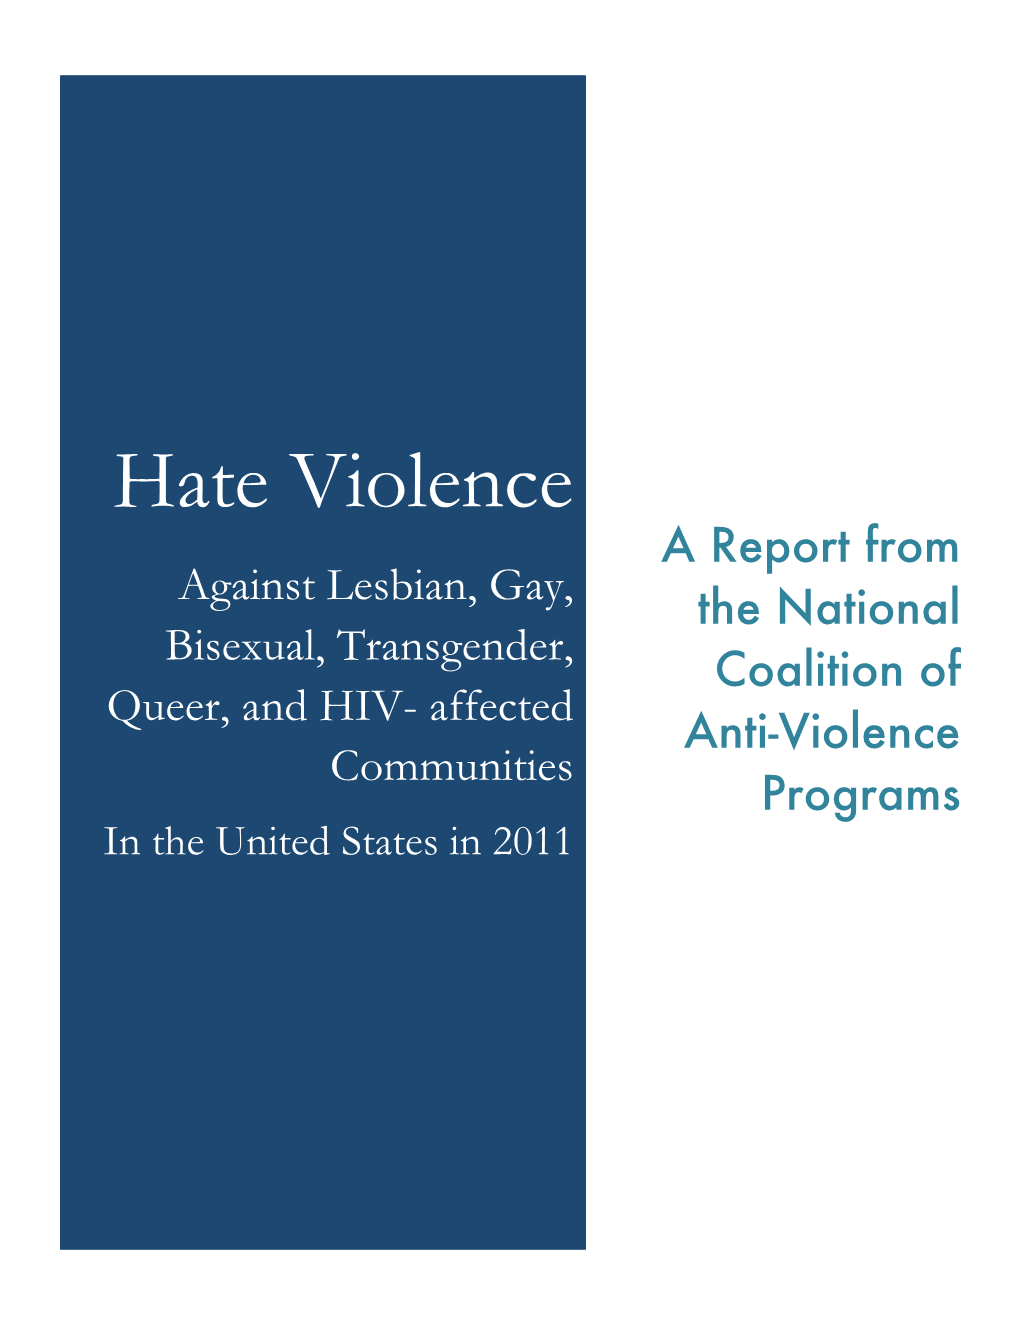 Hate Violence Against Lesbian, Gay, Bisexual, Transgender, and HIV